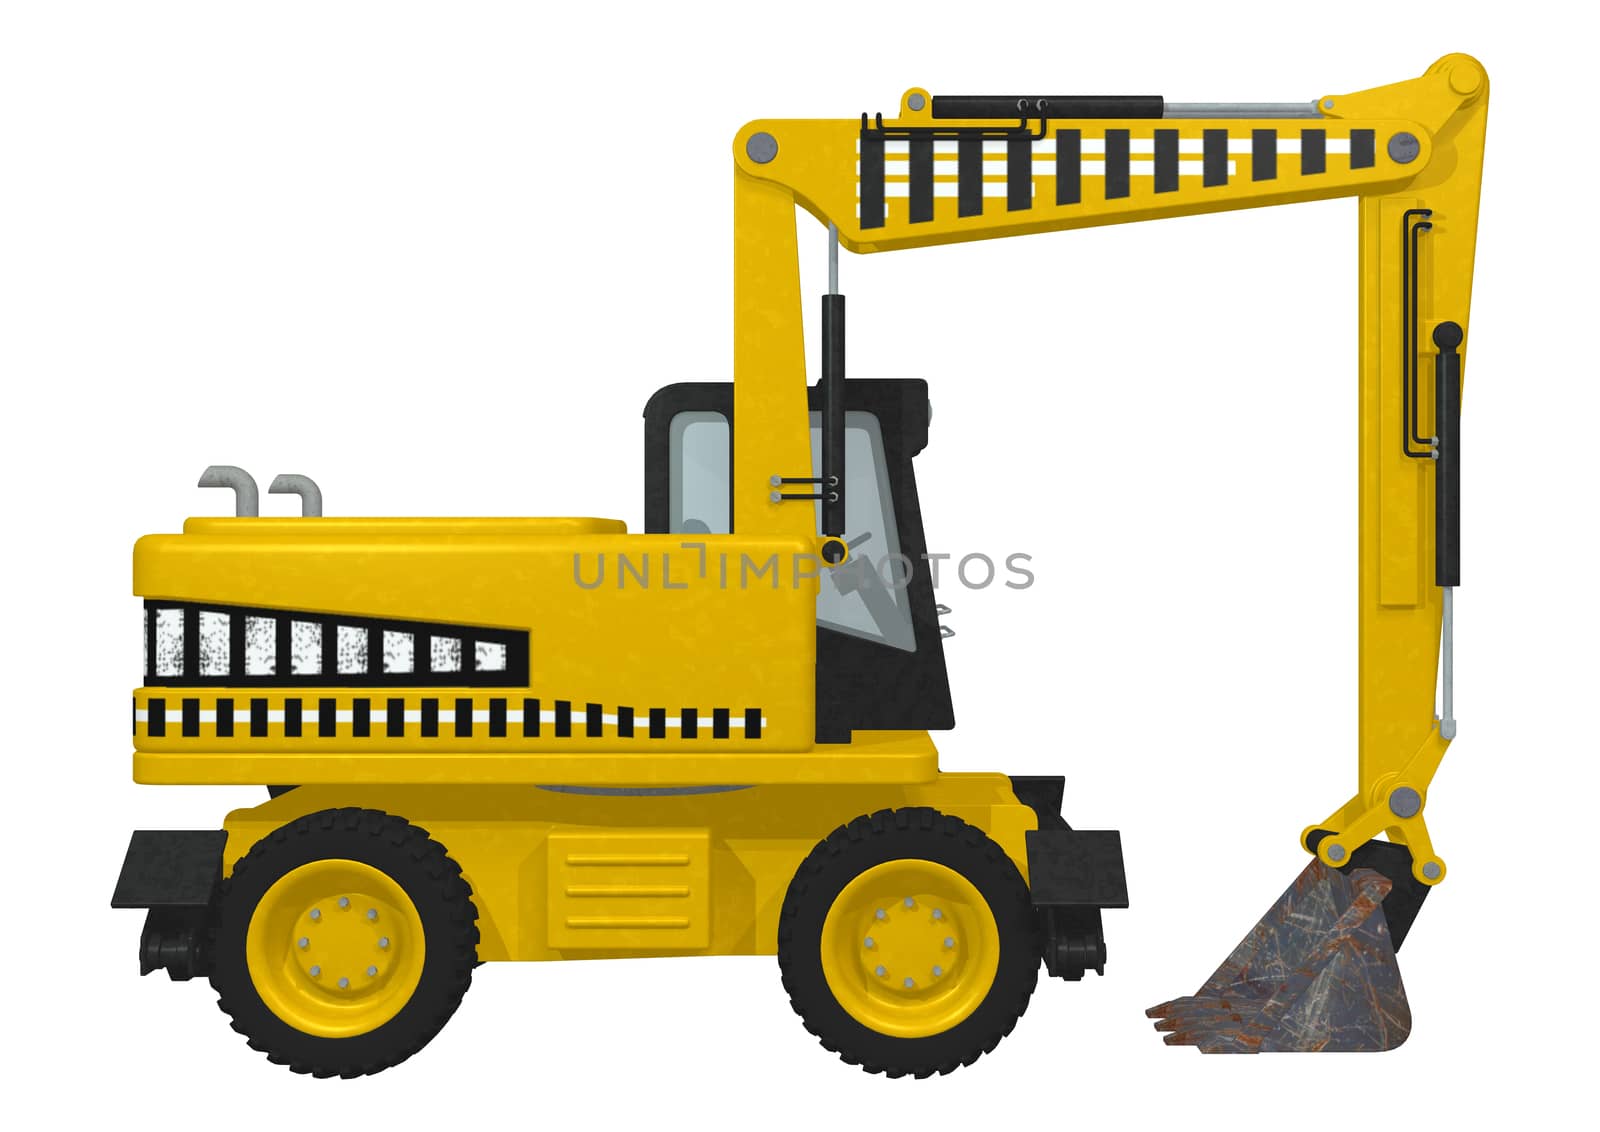 3D digital render of a wheel excavator isolated on white background